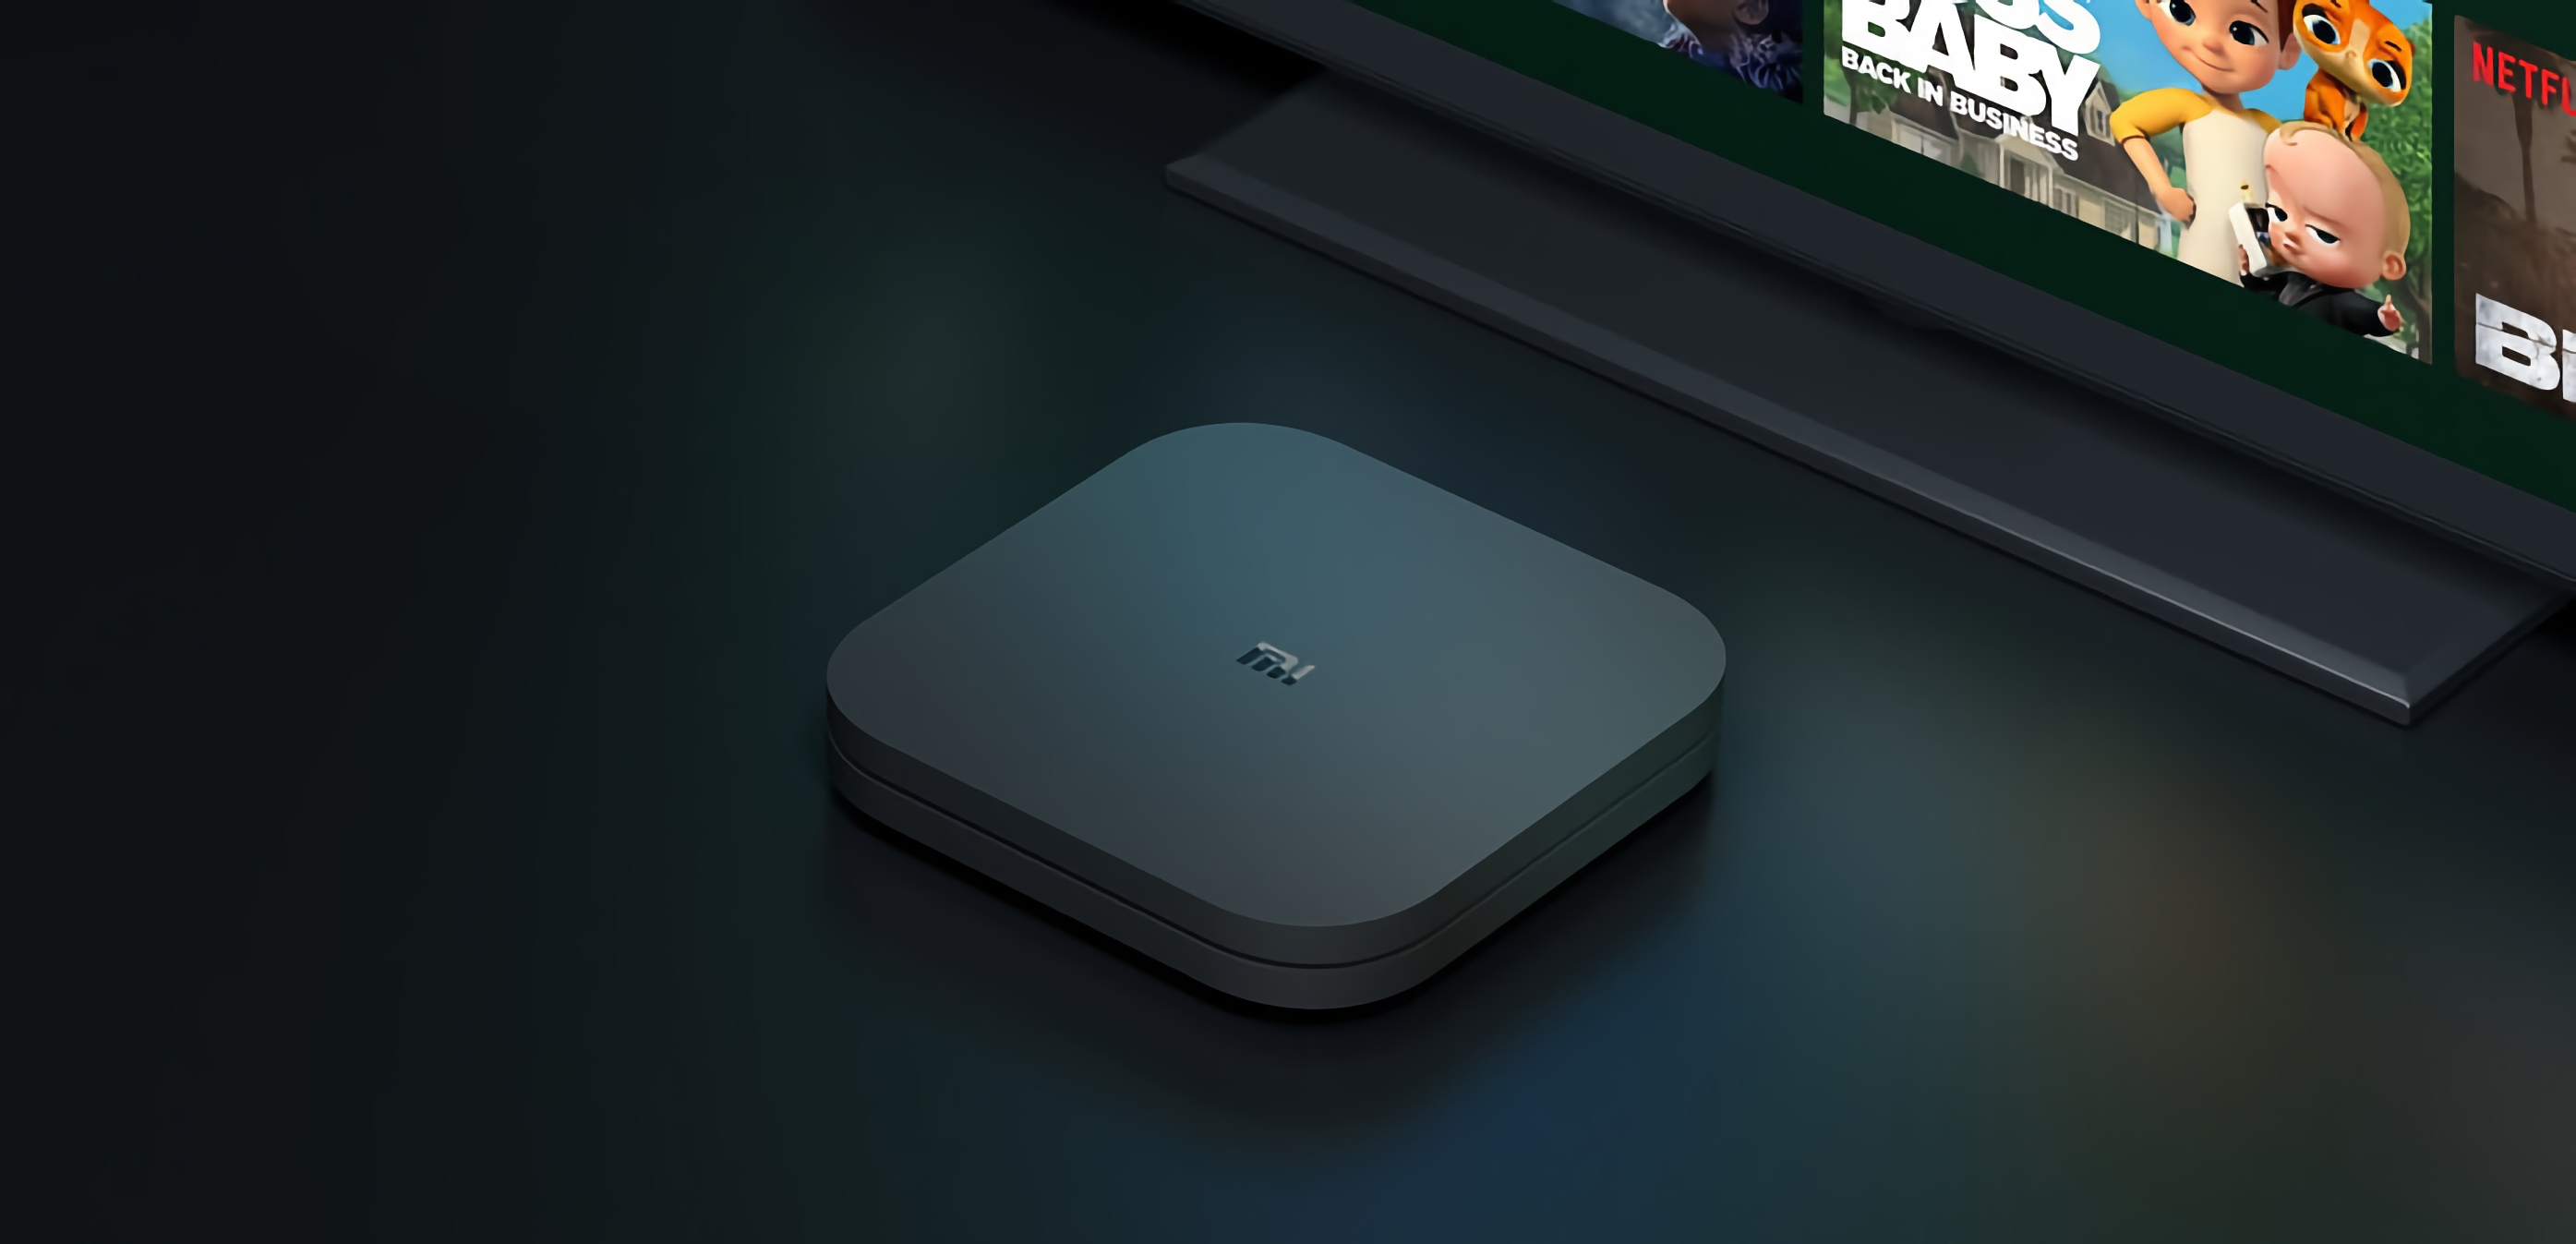 The Xiaomi Mi Box S with 4K, Chromecast and Android TV on board can be purchased now on AliExpress for $54